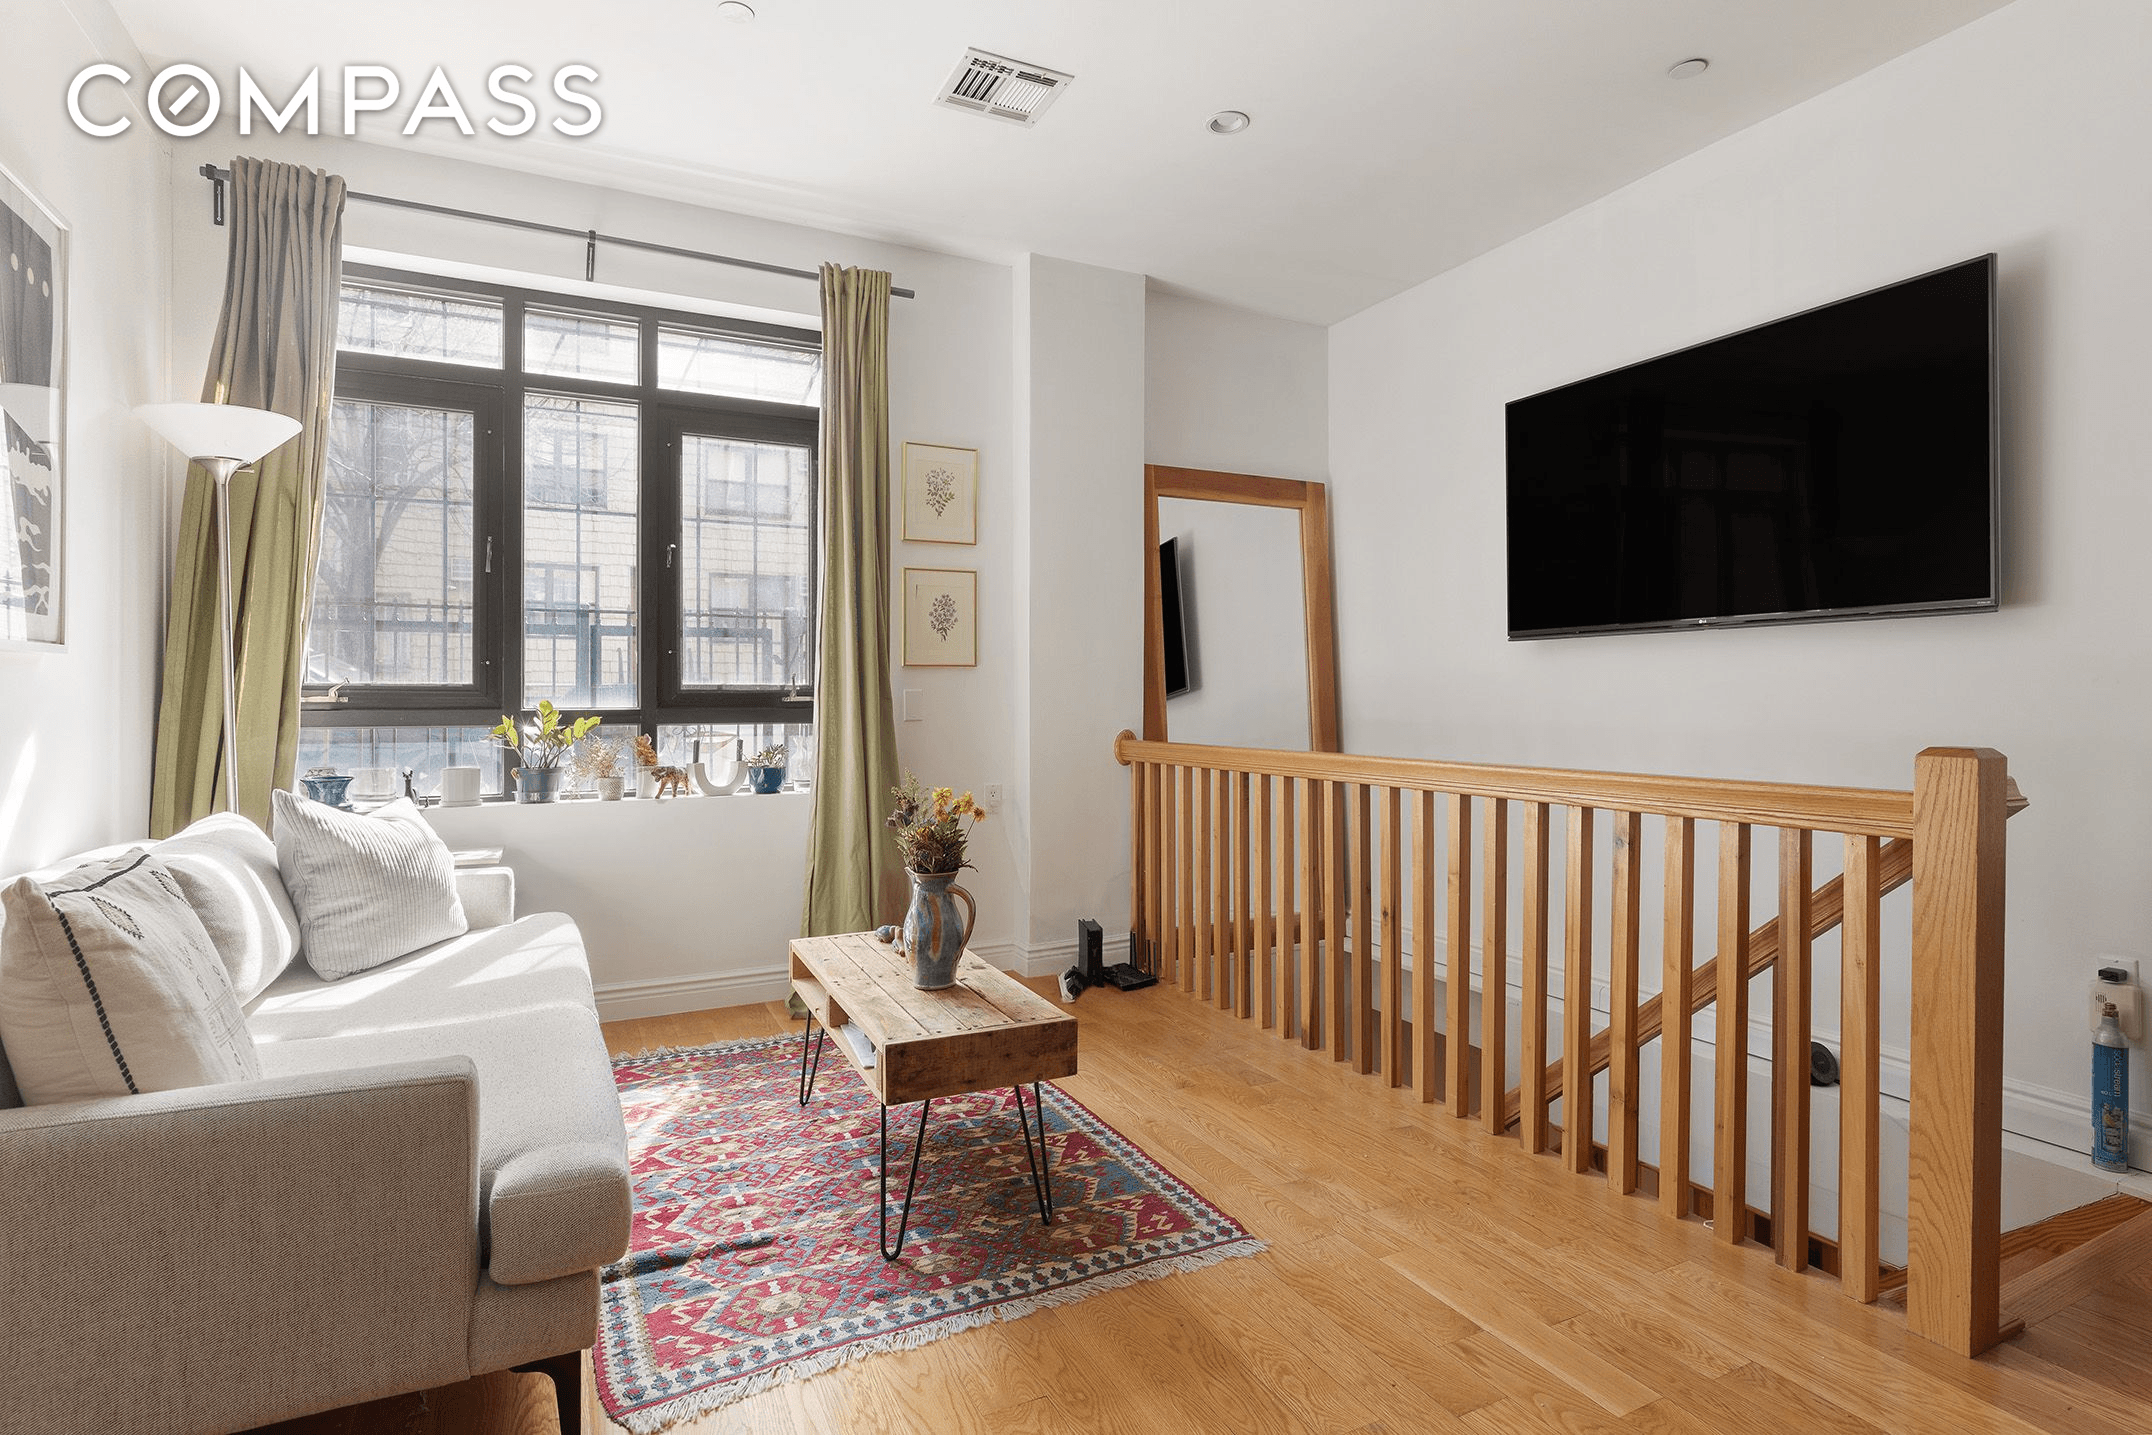 199 Huron Street Residence 1A is a one of a kind 1, 000 square foot duplex located on one of the most charming, quiet, tree lined blocks in Greenpoint.